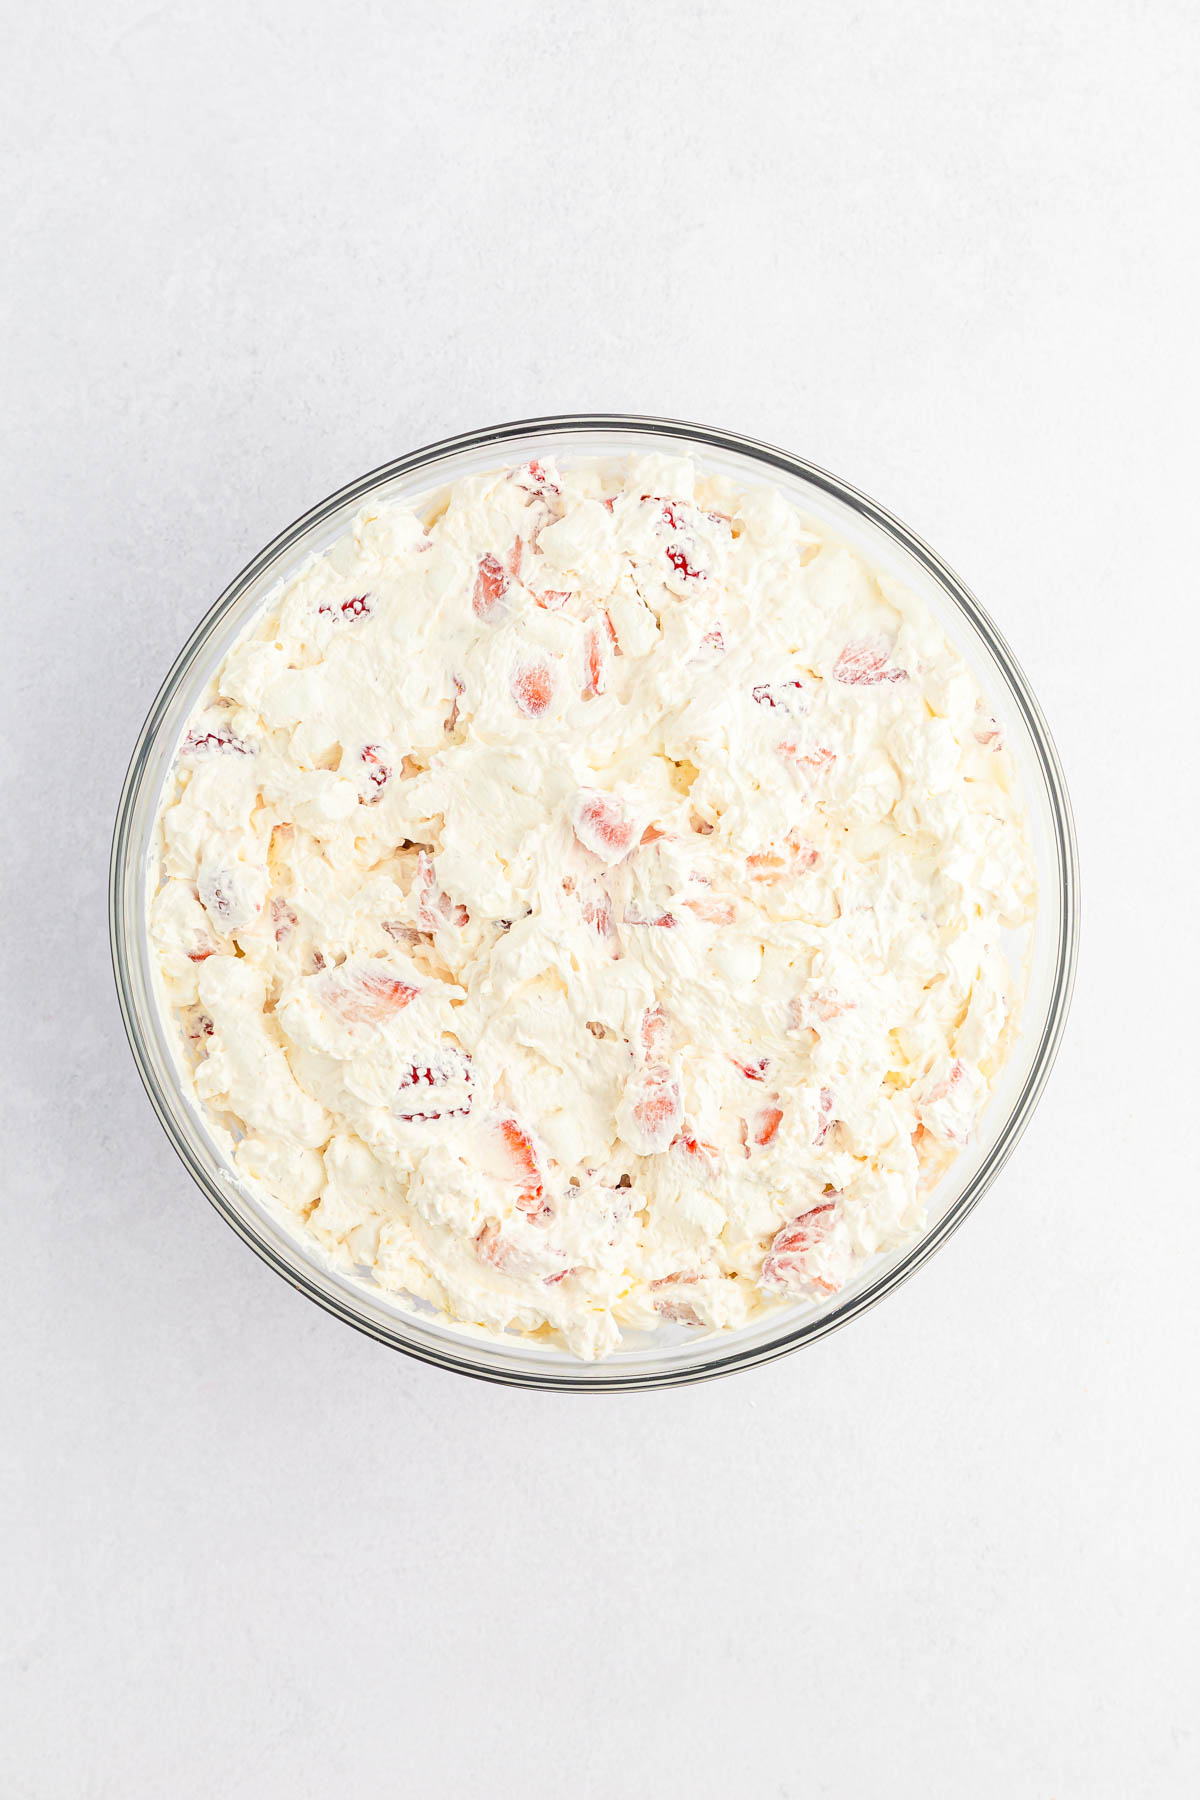 Strawberry Cheesecake Fluff in bowl